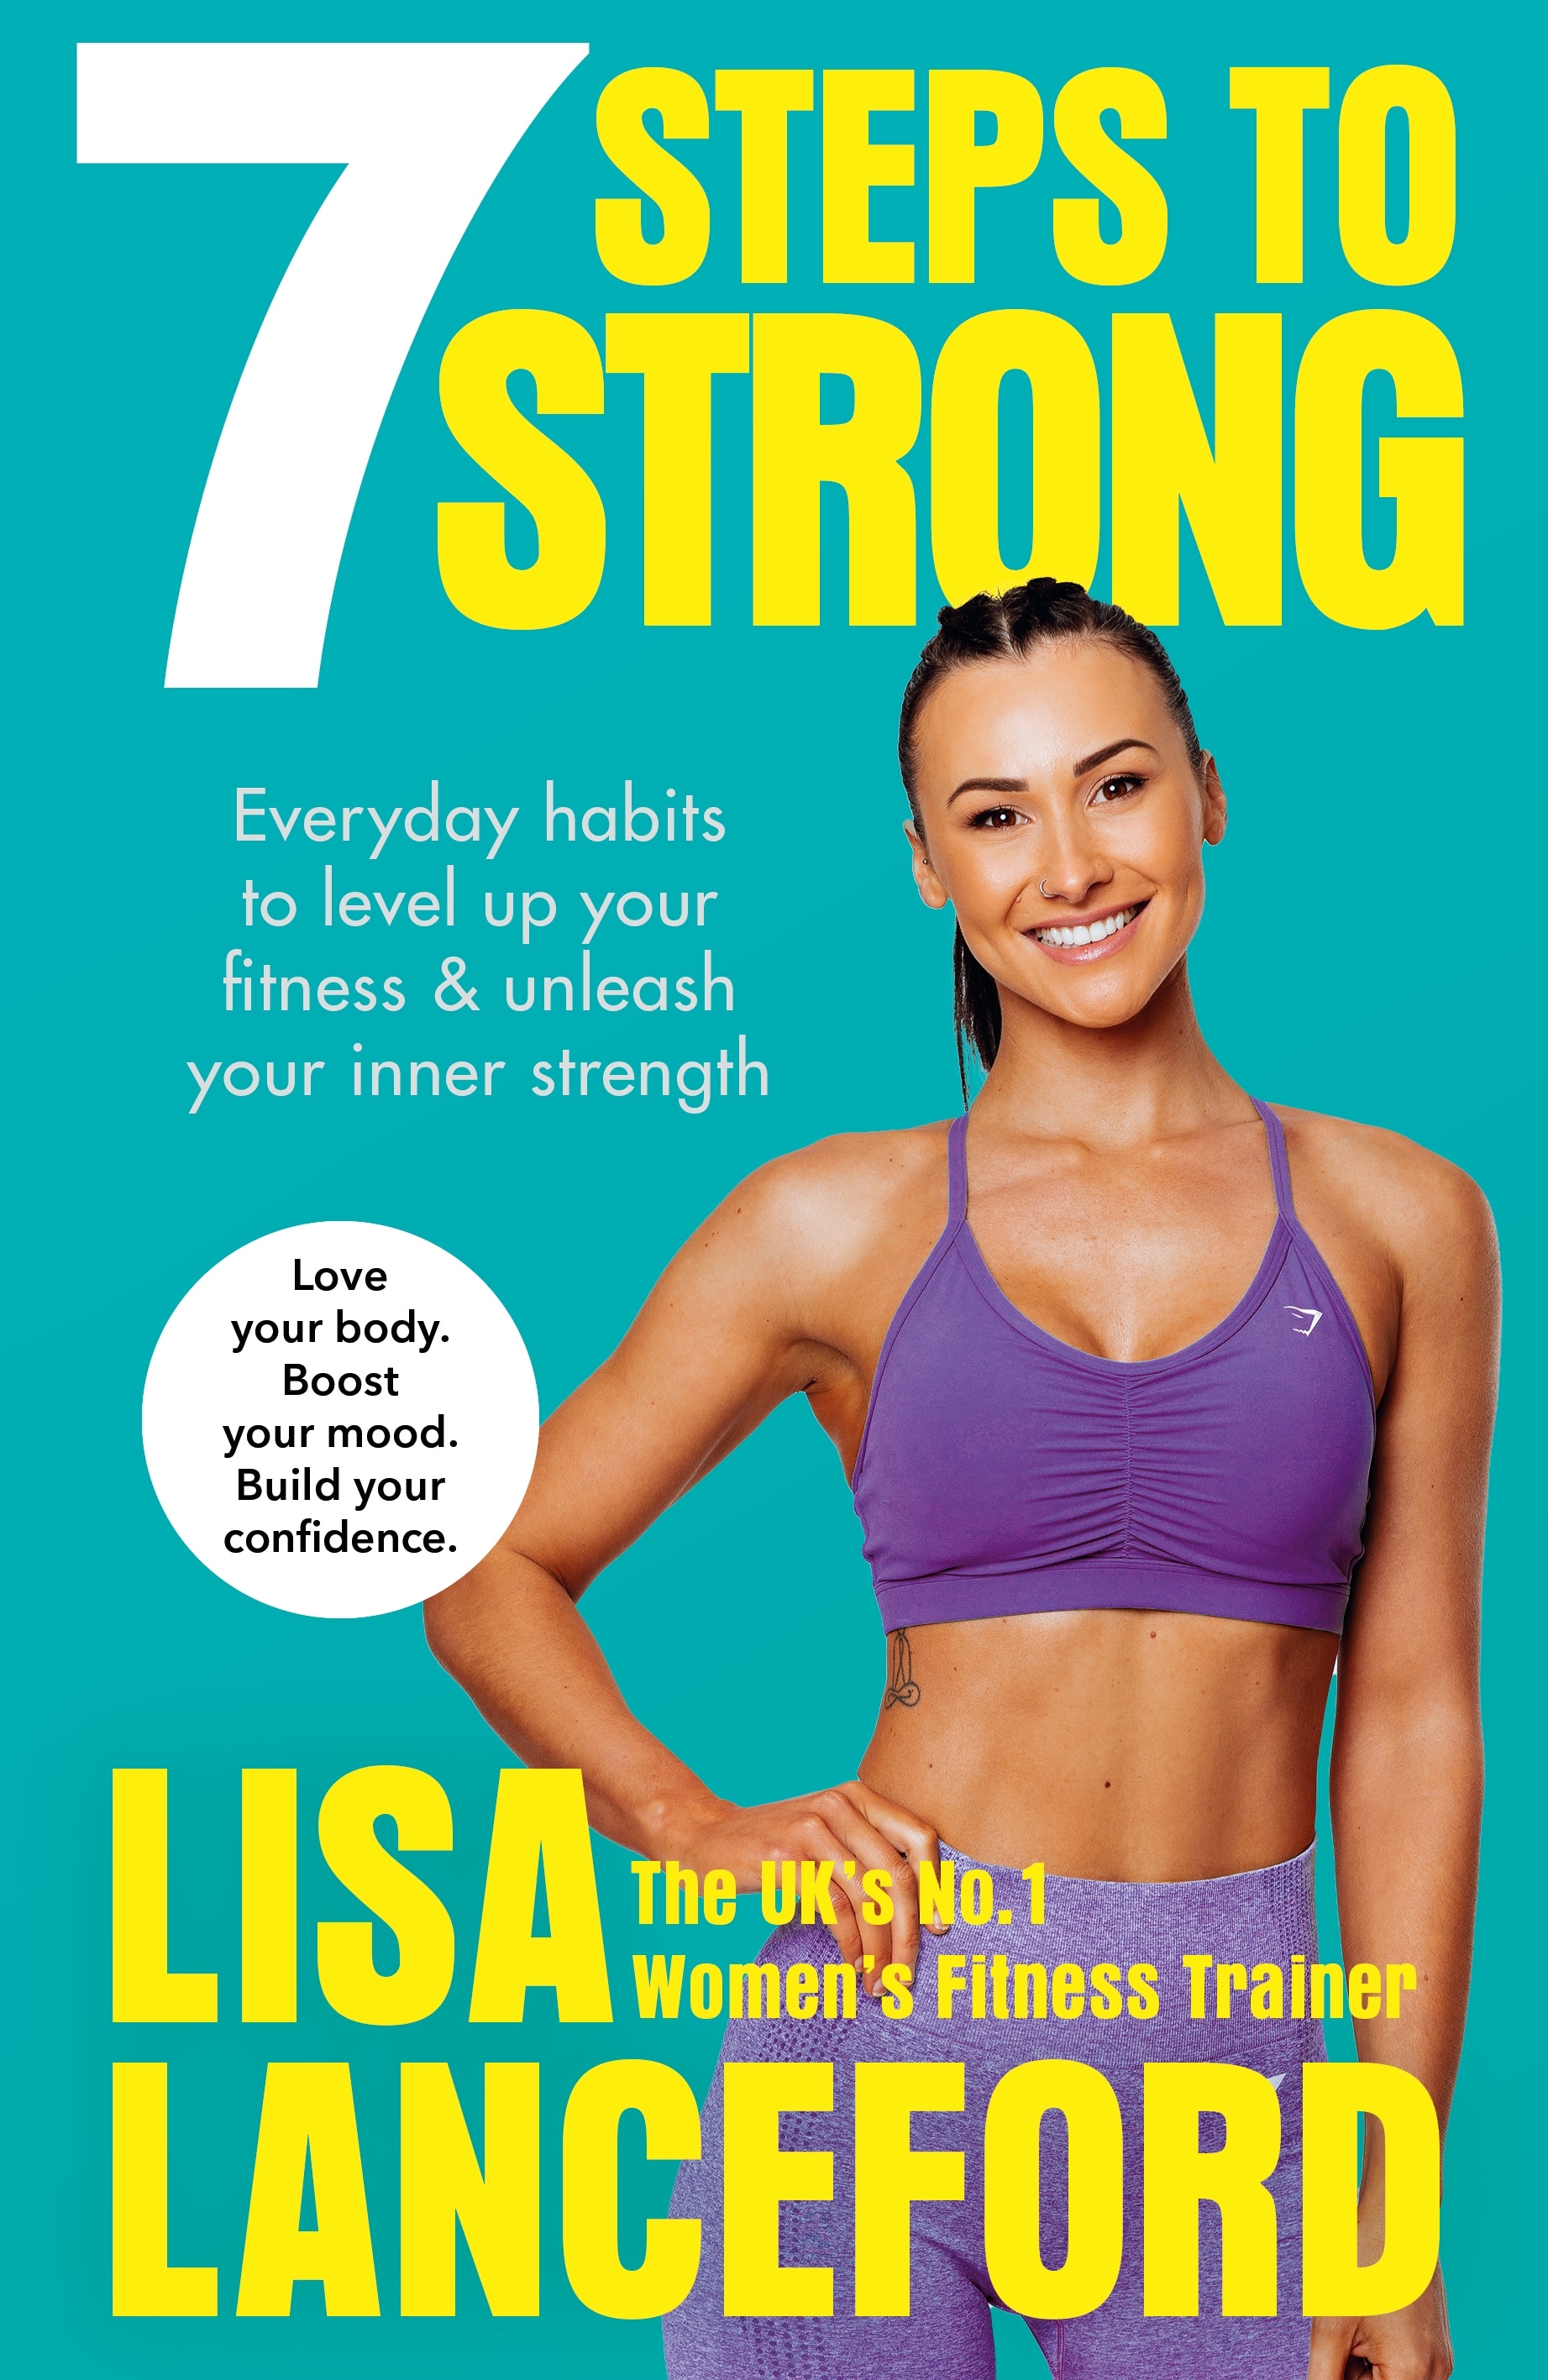 Book “7 Steps to Strong” by Lisa Lanceford — December 30, 2021